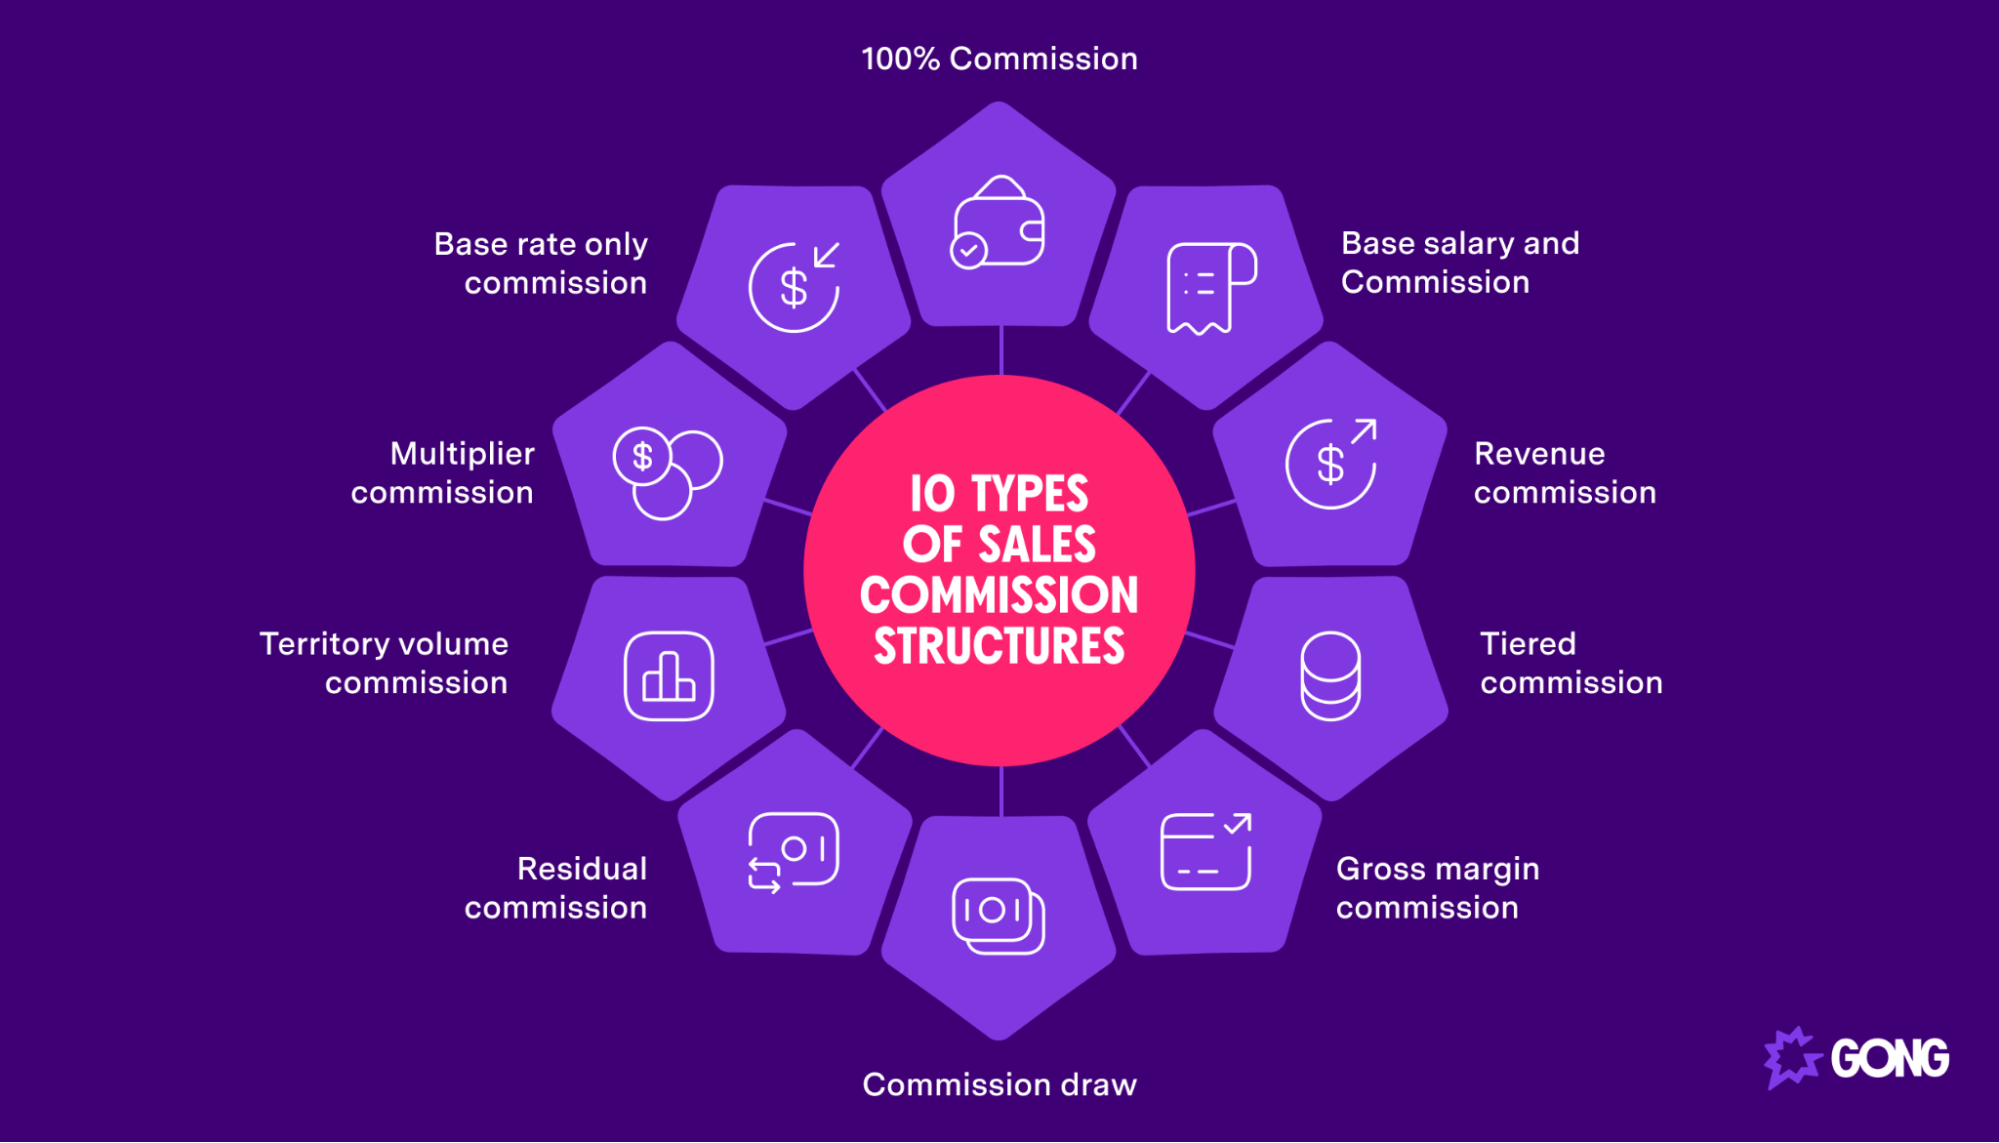 Image depicting the 10 different types of sales commission structures